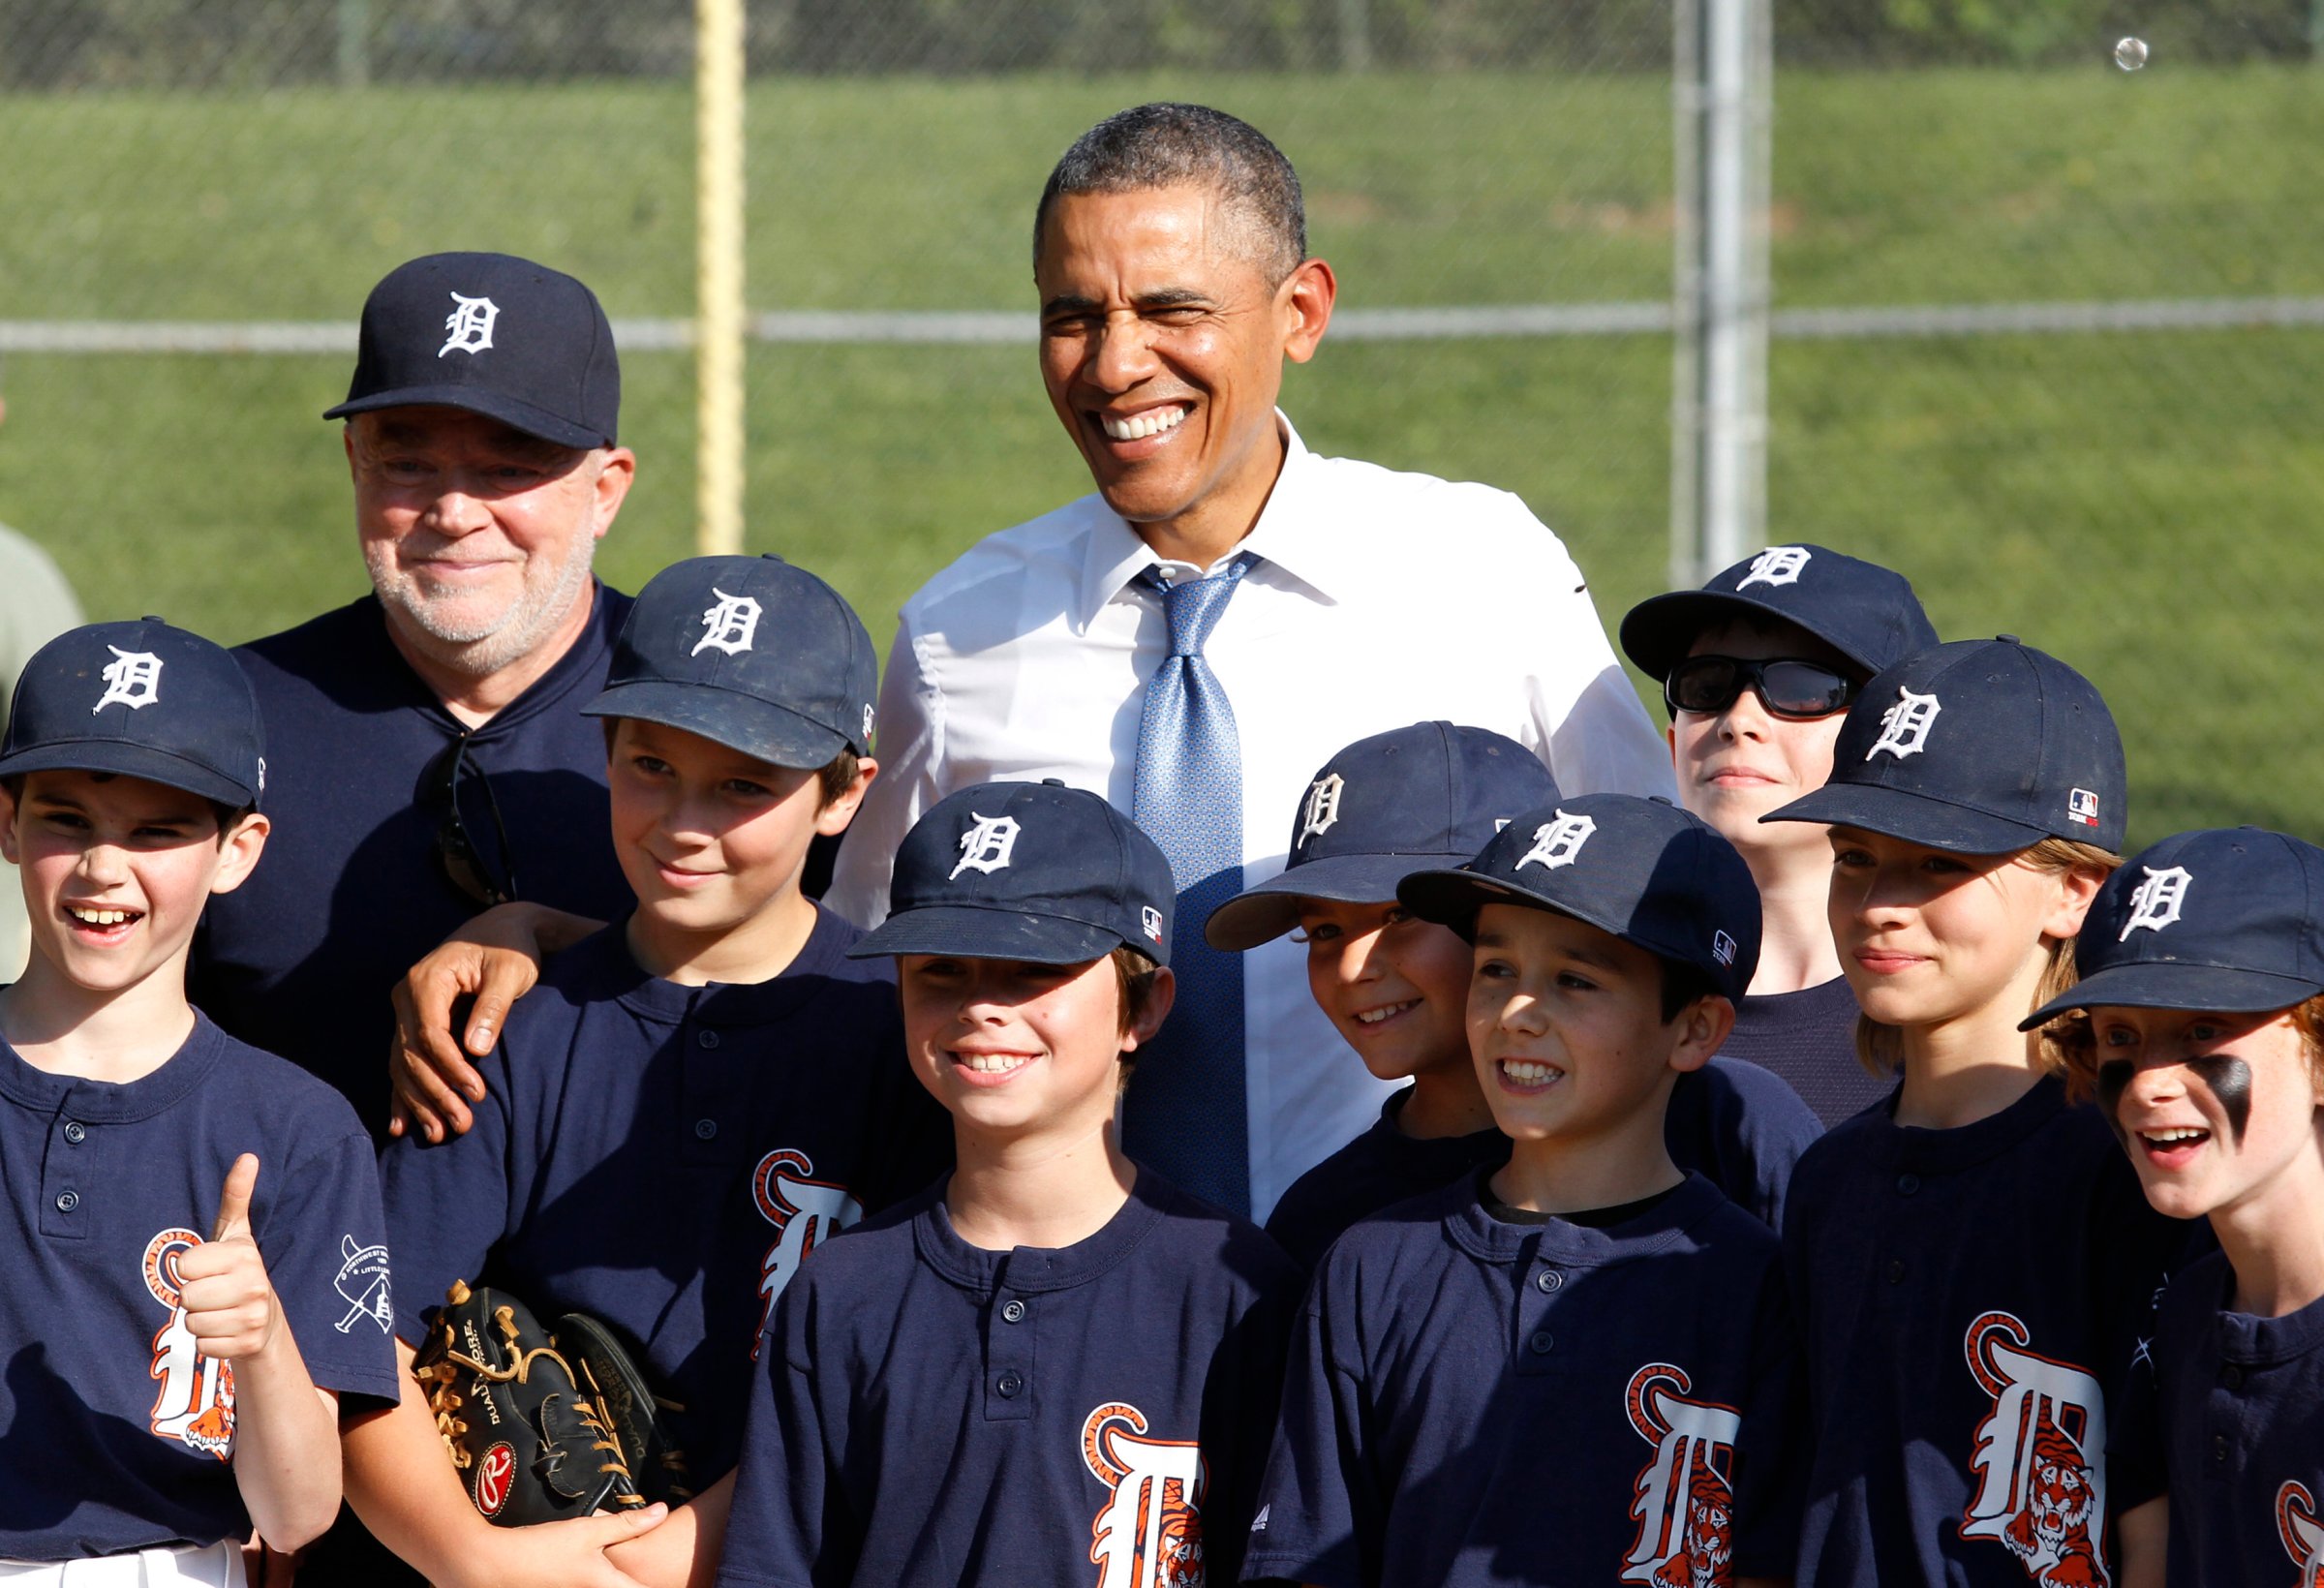 U.S. President Barack Obama poses with Little League baseball players and their coach at Friendship Park in Washington